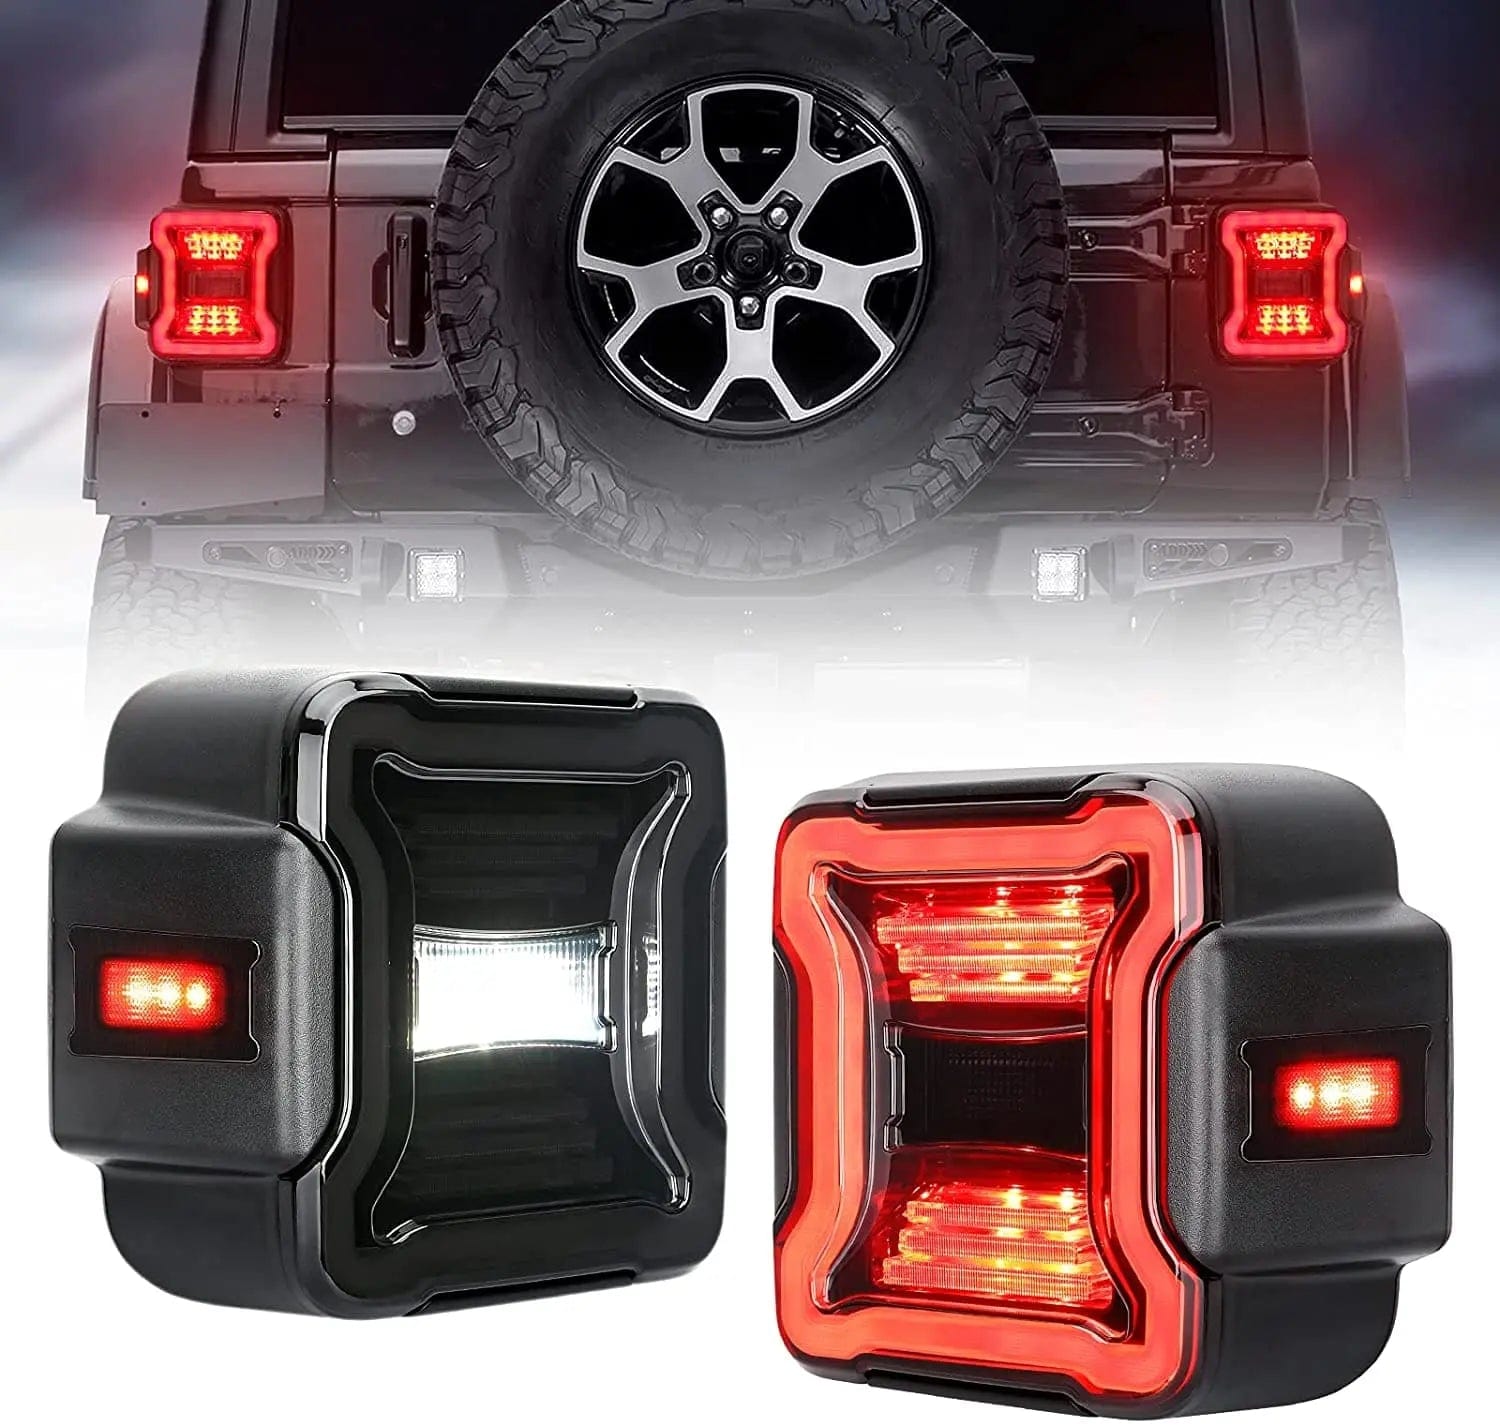 SUPAREE.COM Jeep Combo Suparee Jeep Wrangler LED Tail Lights with Spare Tire light & 3rd Brake Light Set for JL Product description